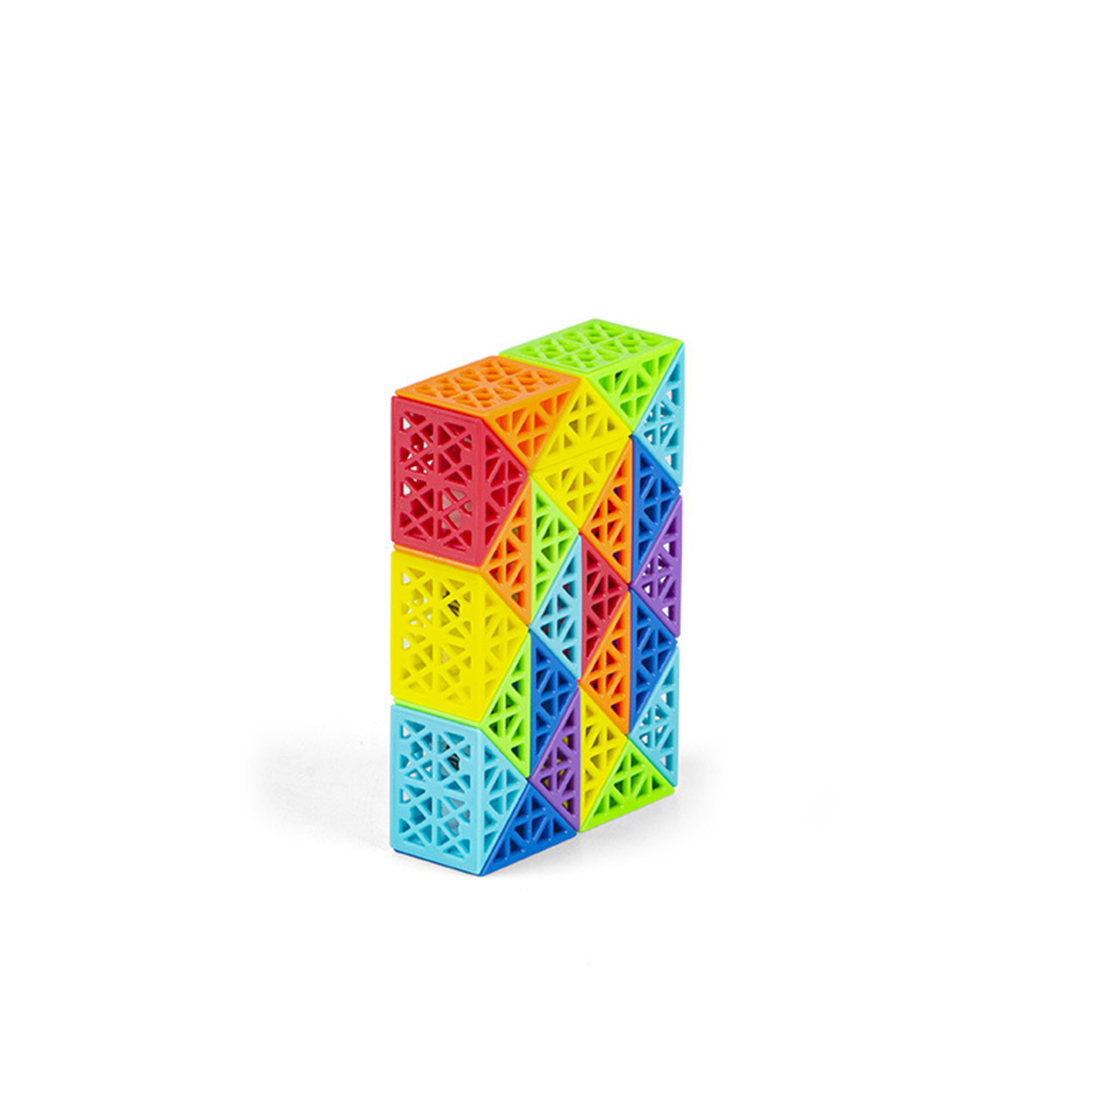 Diansheng Colorful Hollow-24 Sections Variety Magic Snake Cube Puzzle